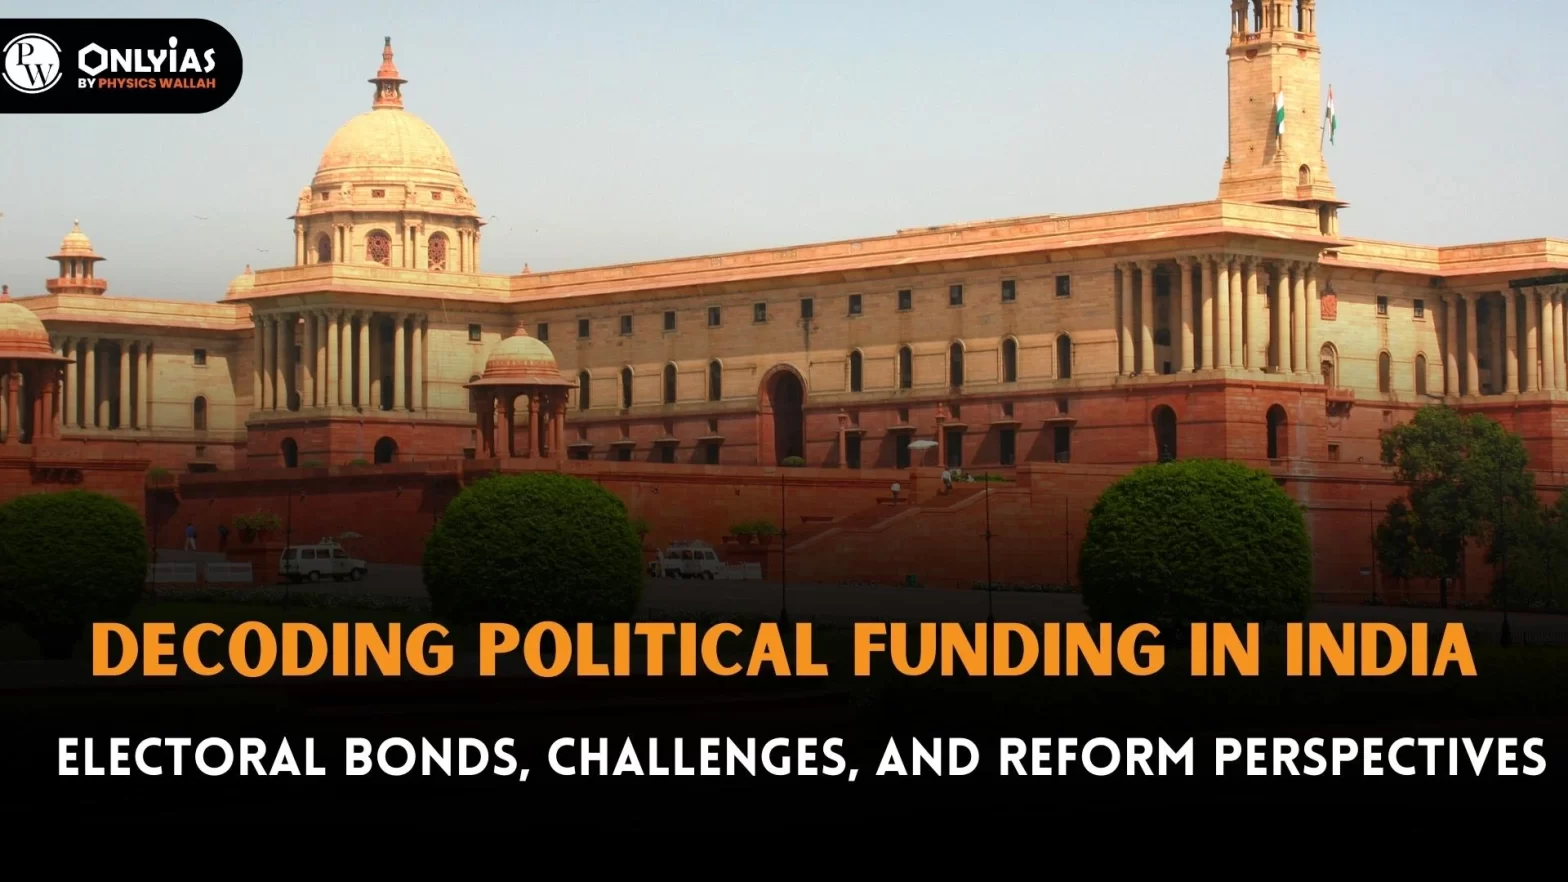 Decoding Political Funding in India: Electoral Bonds, Challenges, and Reform Perspectives